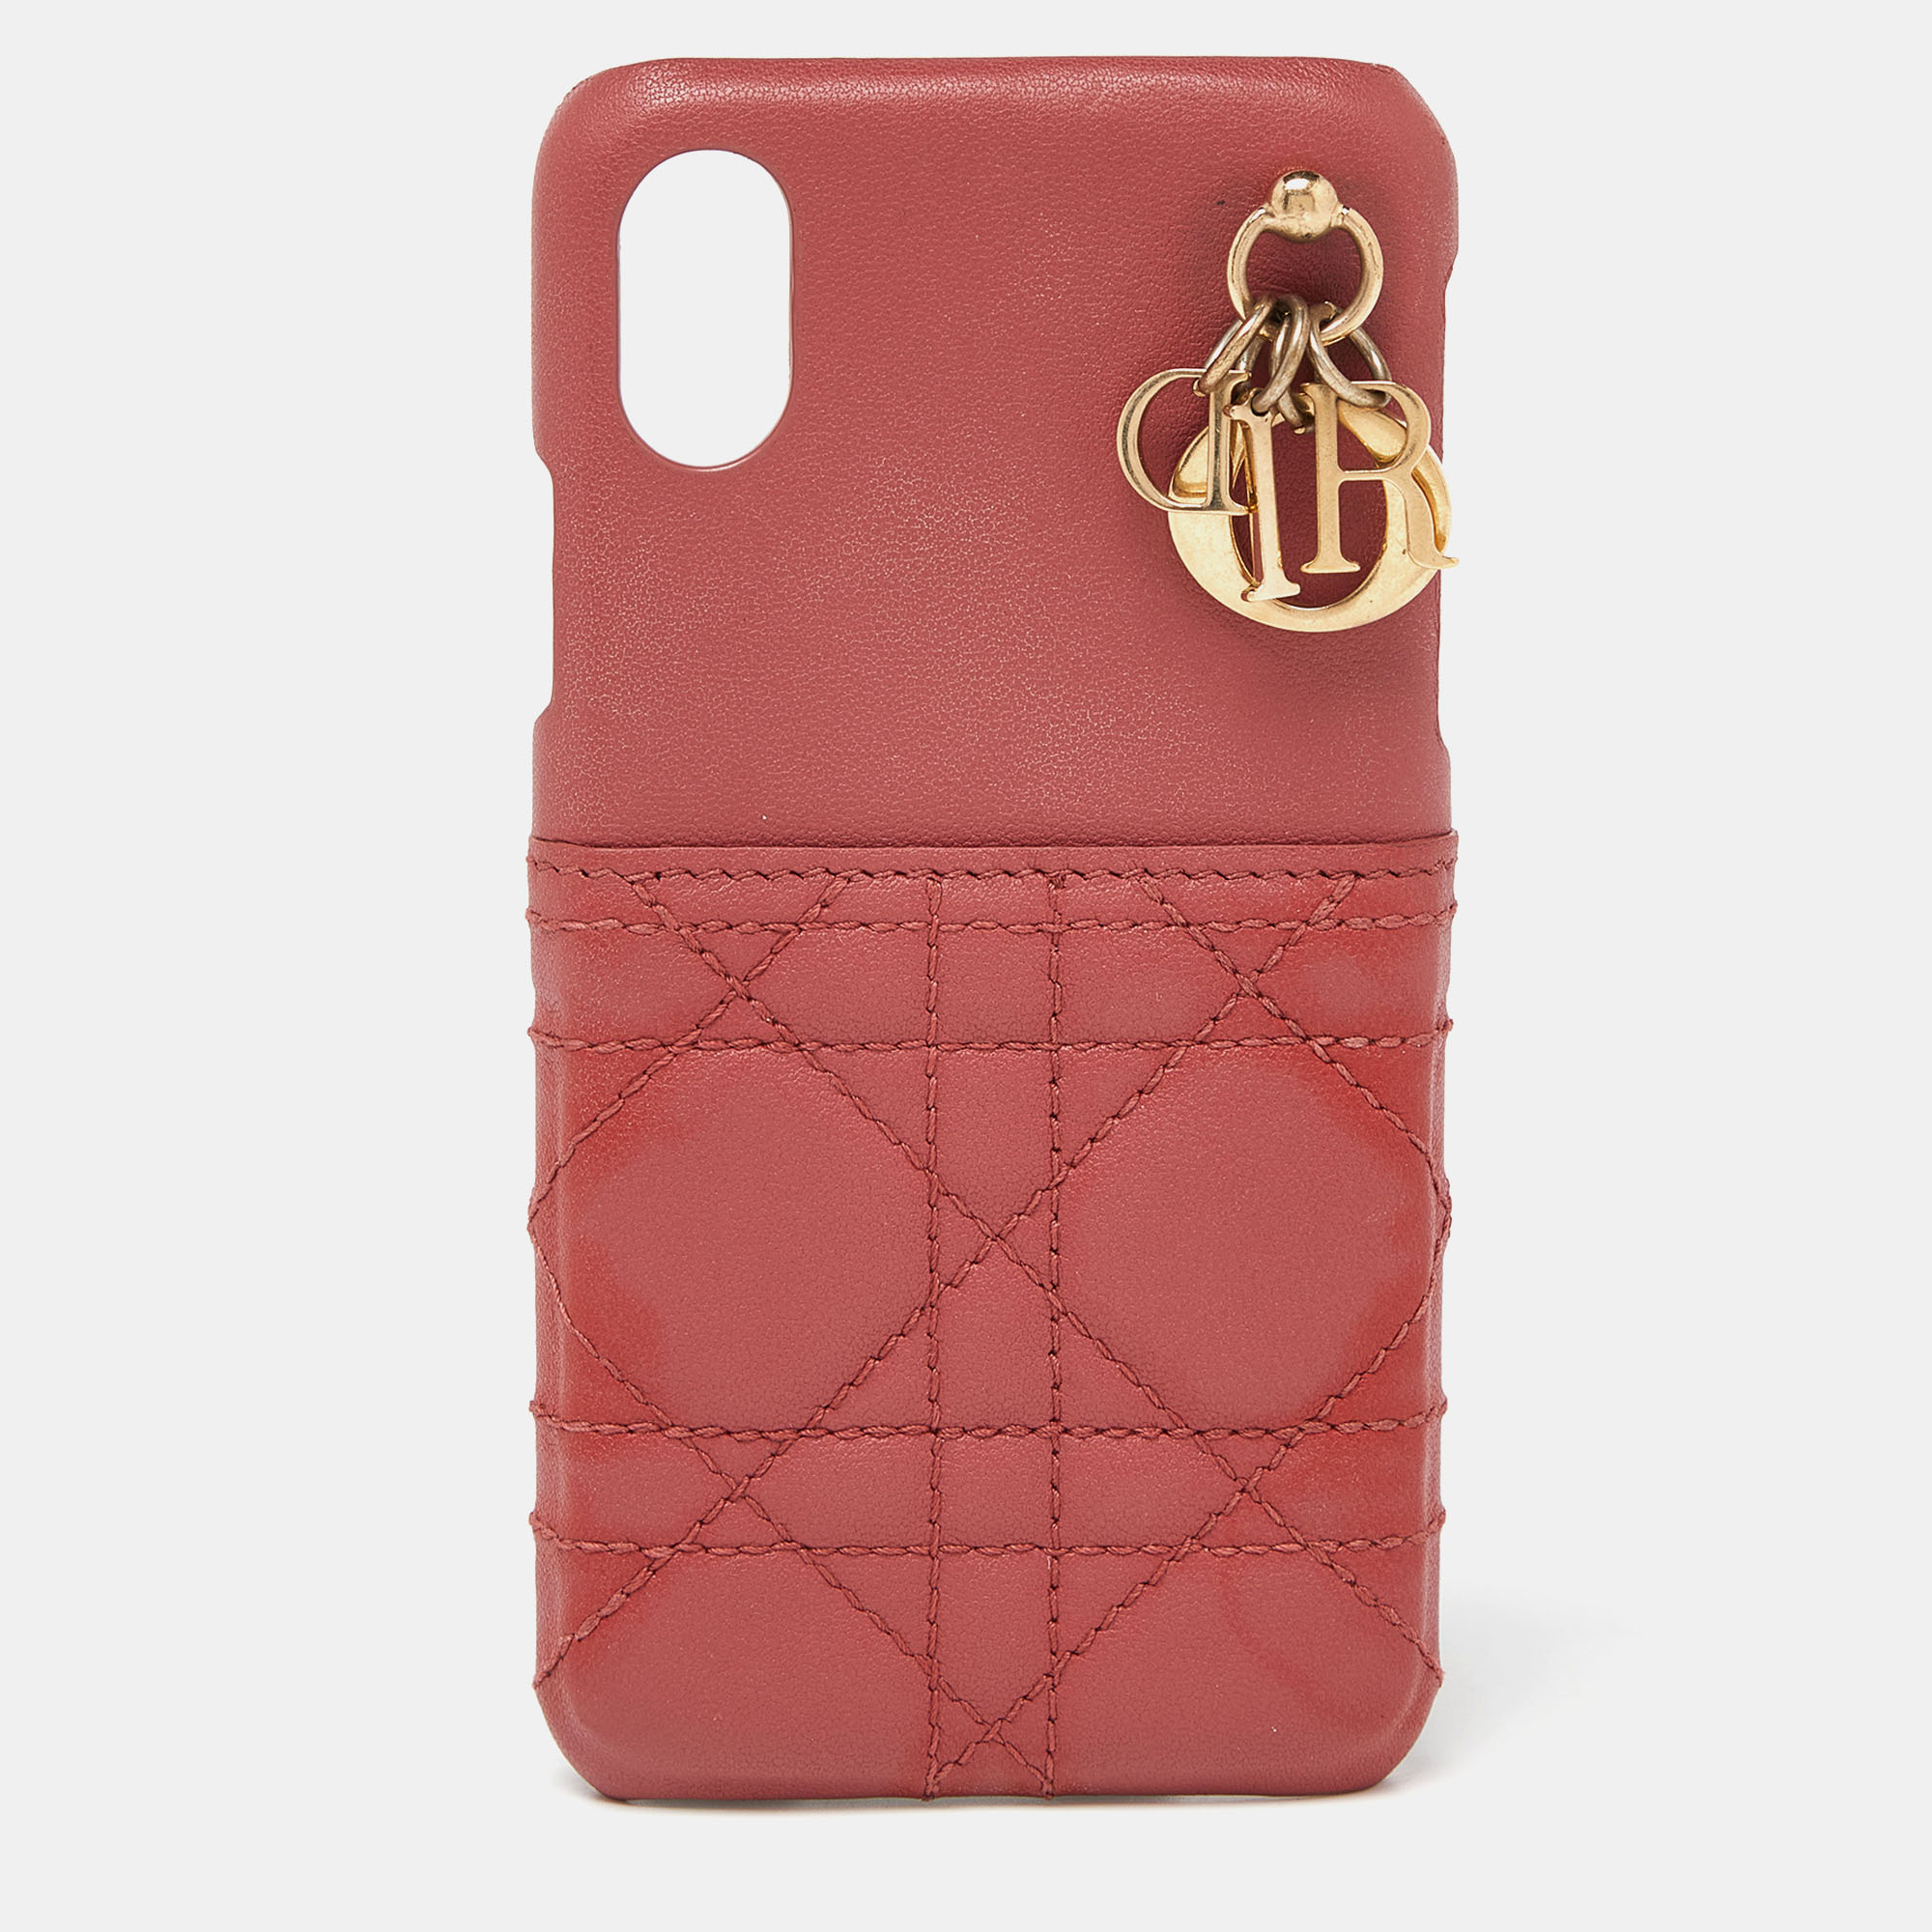 Dior old rose cannage leather lady dior iphone x/xs case